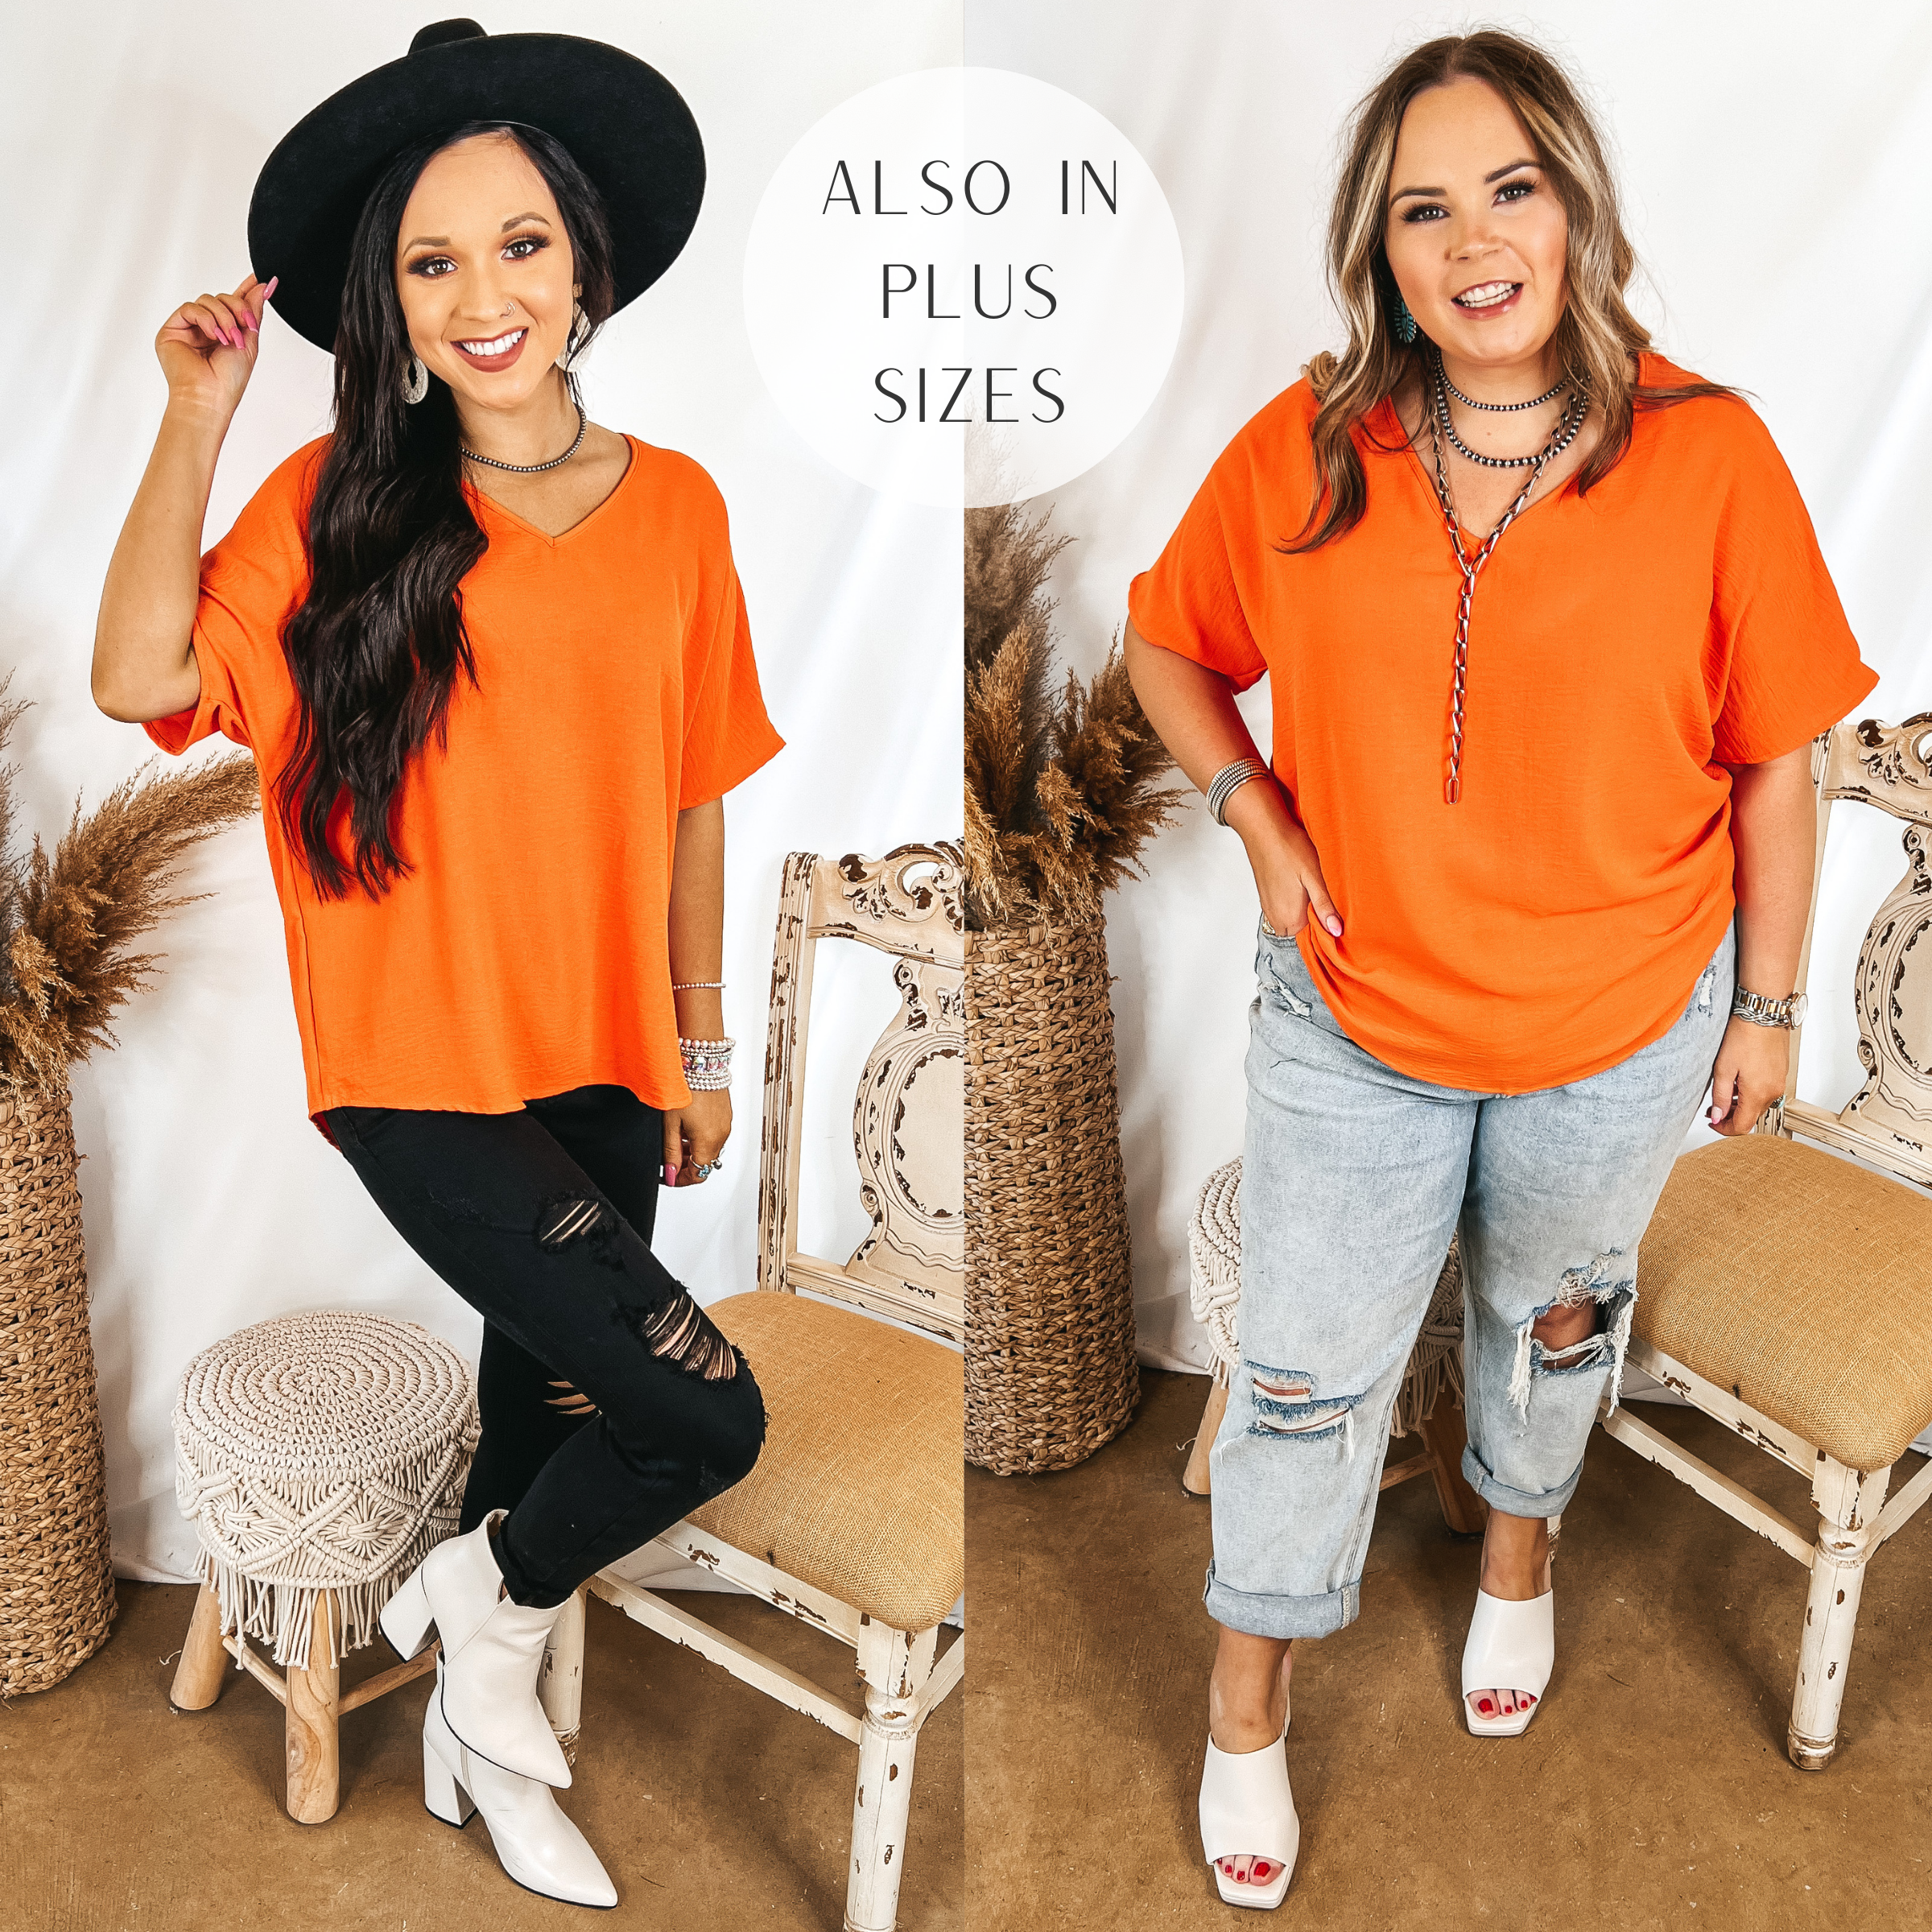 Models are wearing an oversized v neck top that is bright orange. Size small model has it paired with black jeans, white booties, and a black hat. Size large model has it paired with light wash jeans, white heels, and silver jewelry.